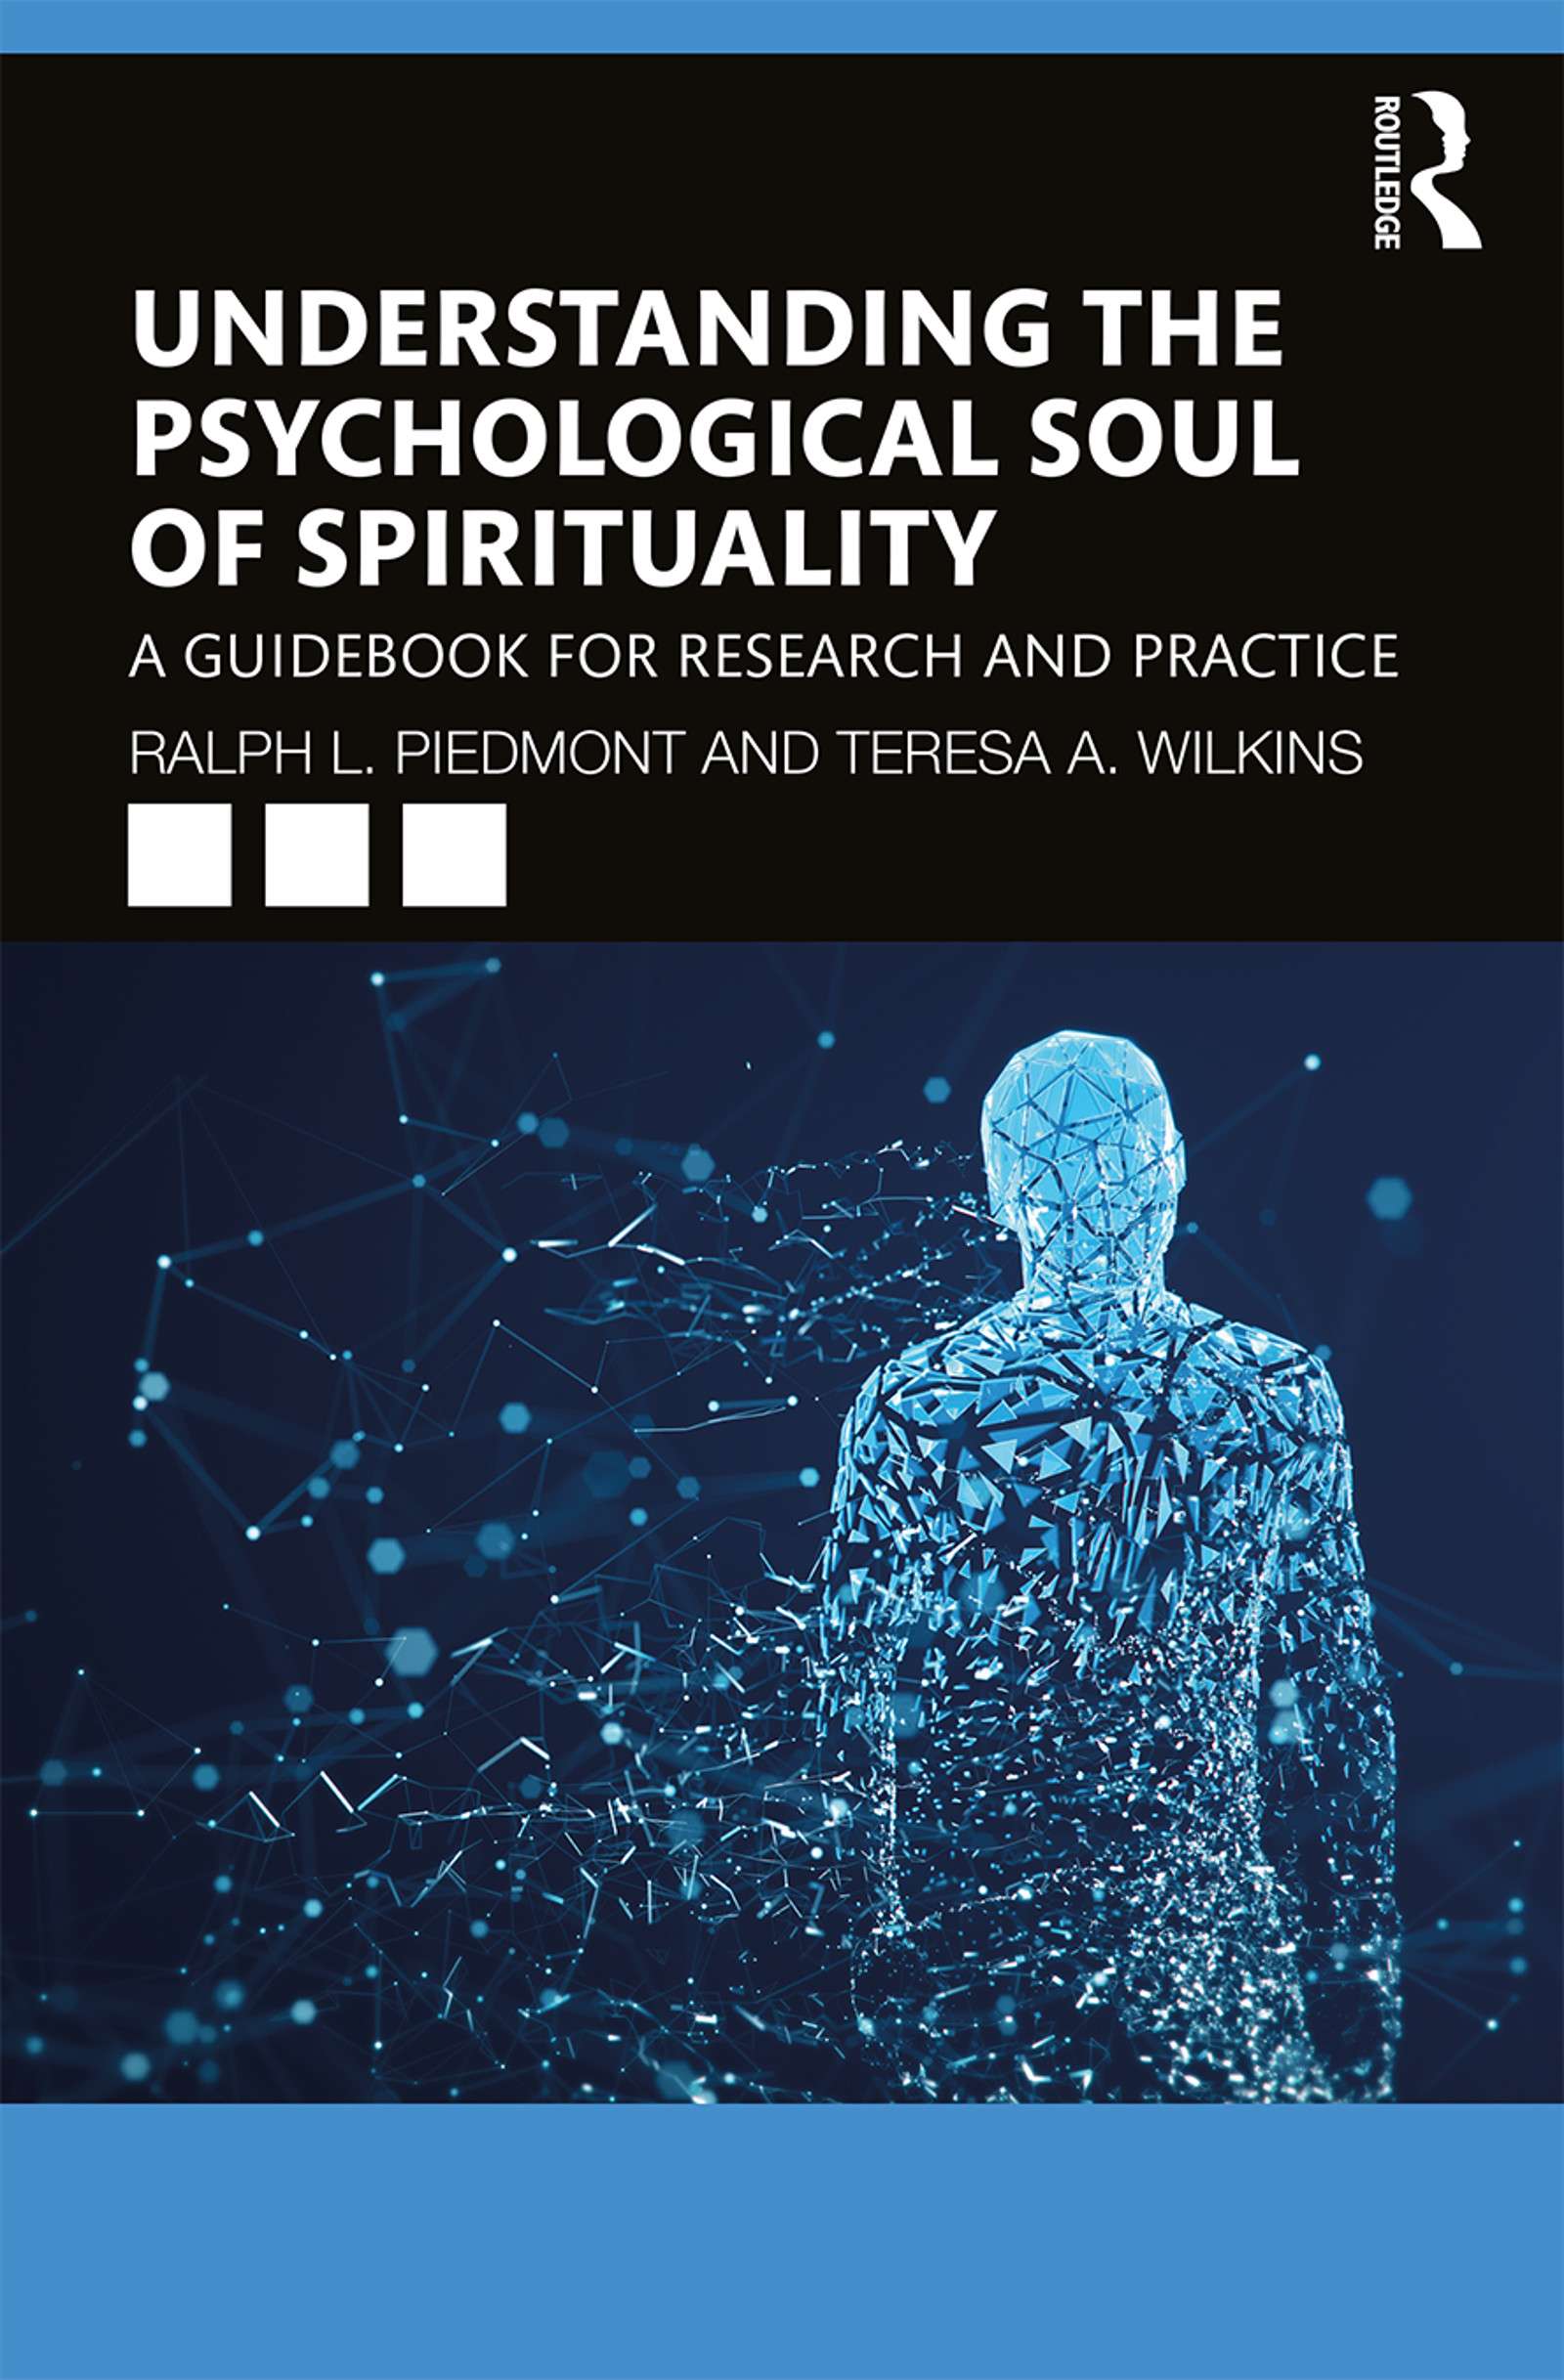 Understanding the Psychological Soul of Spirituality